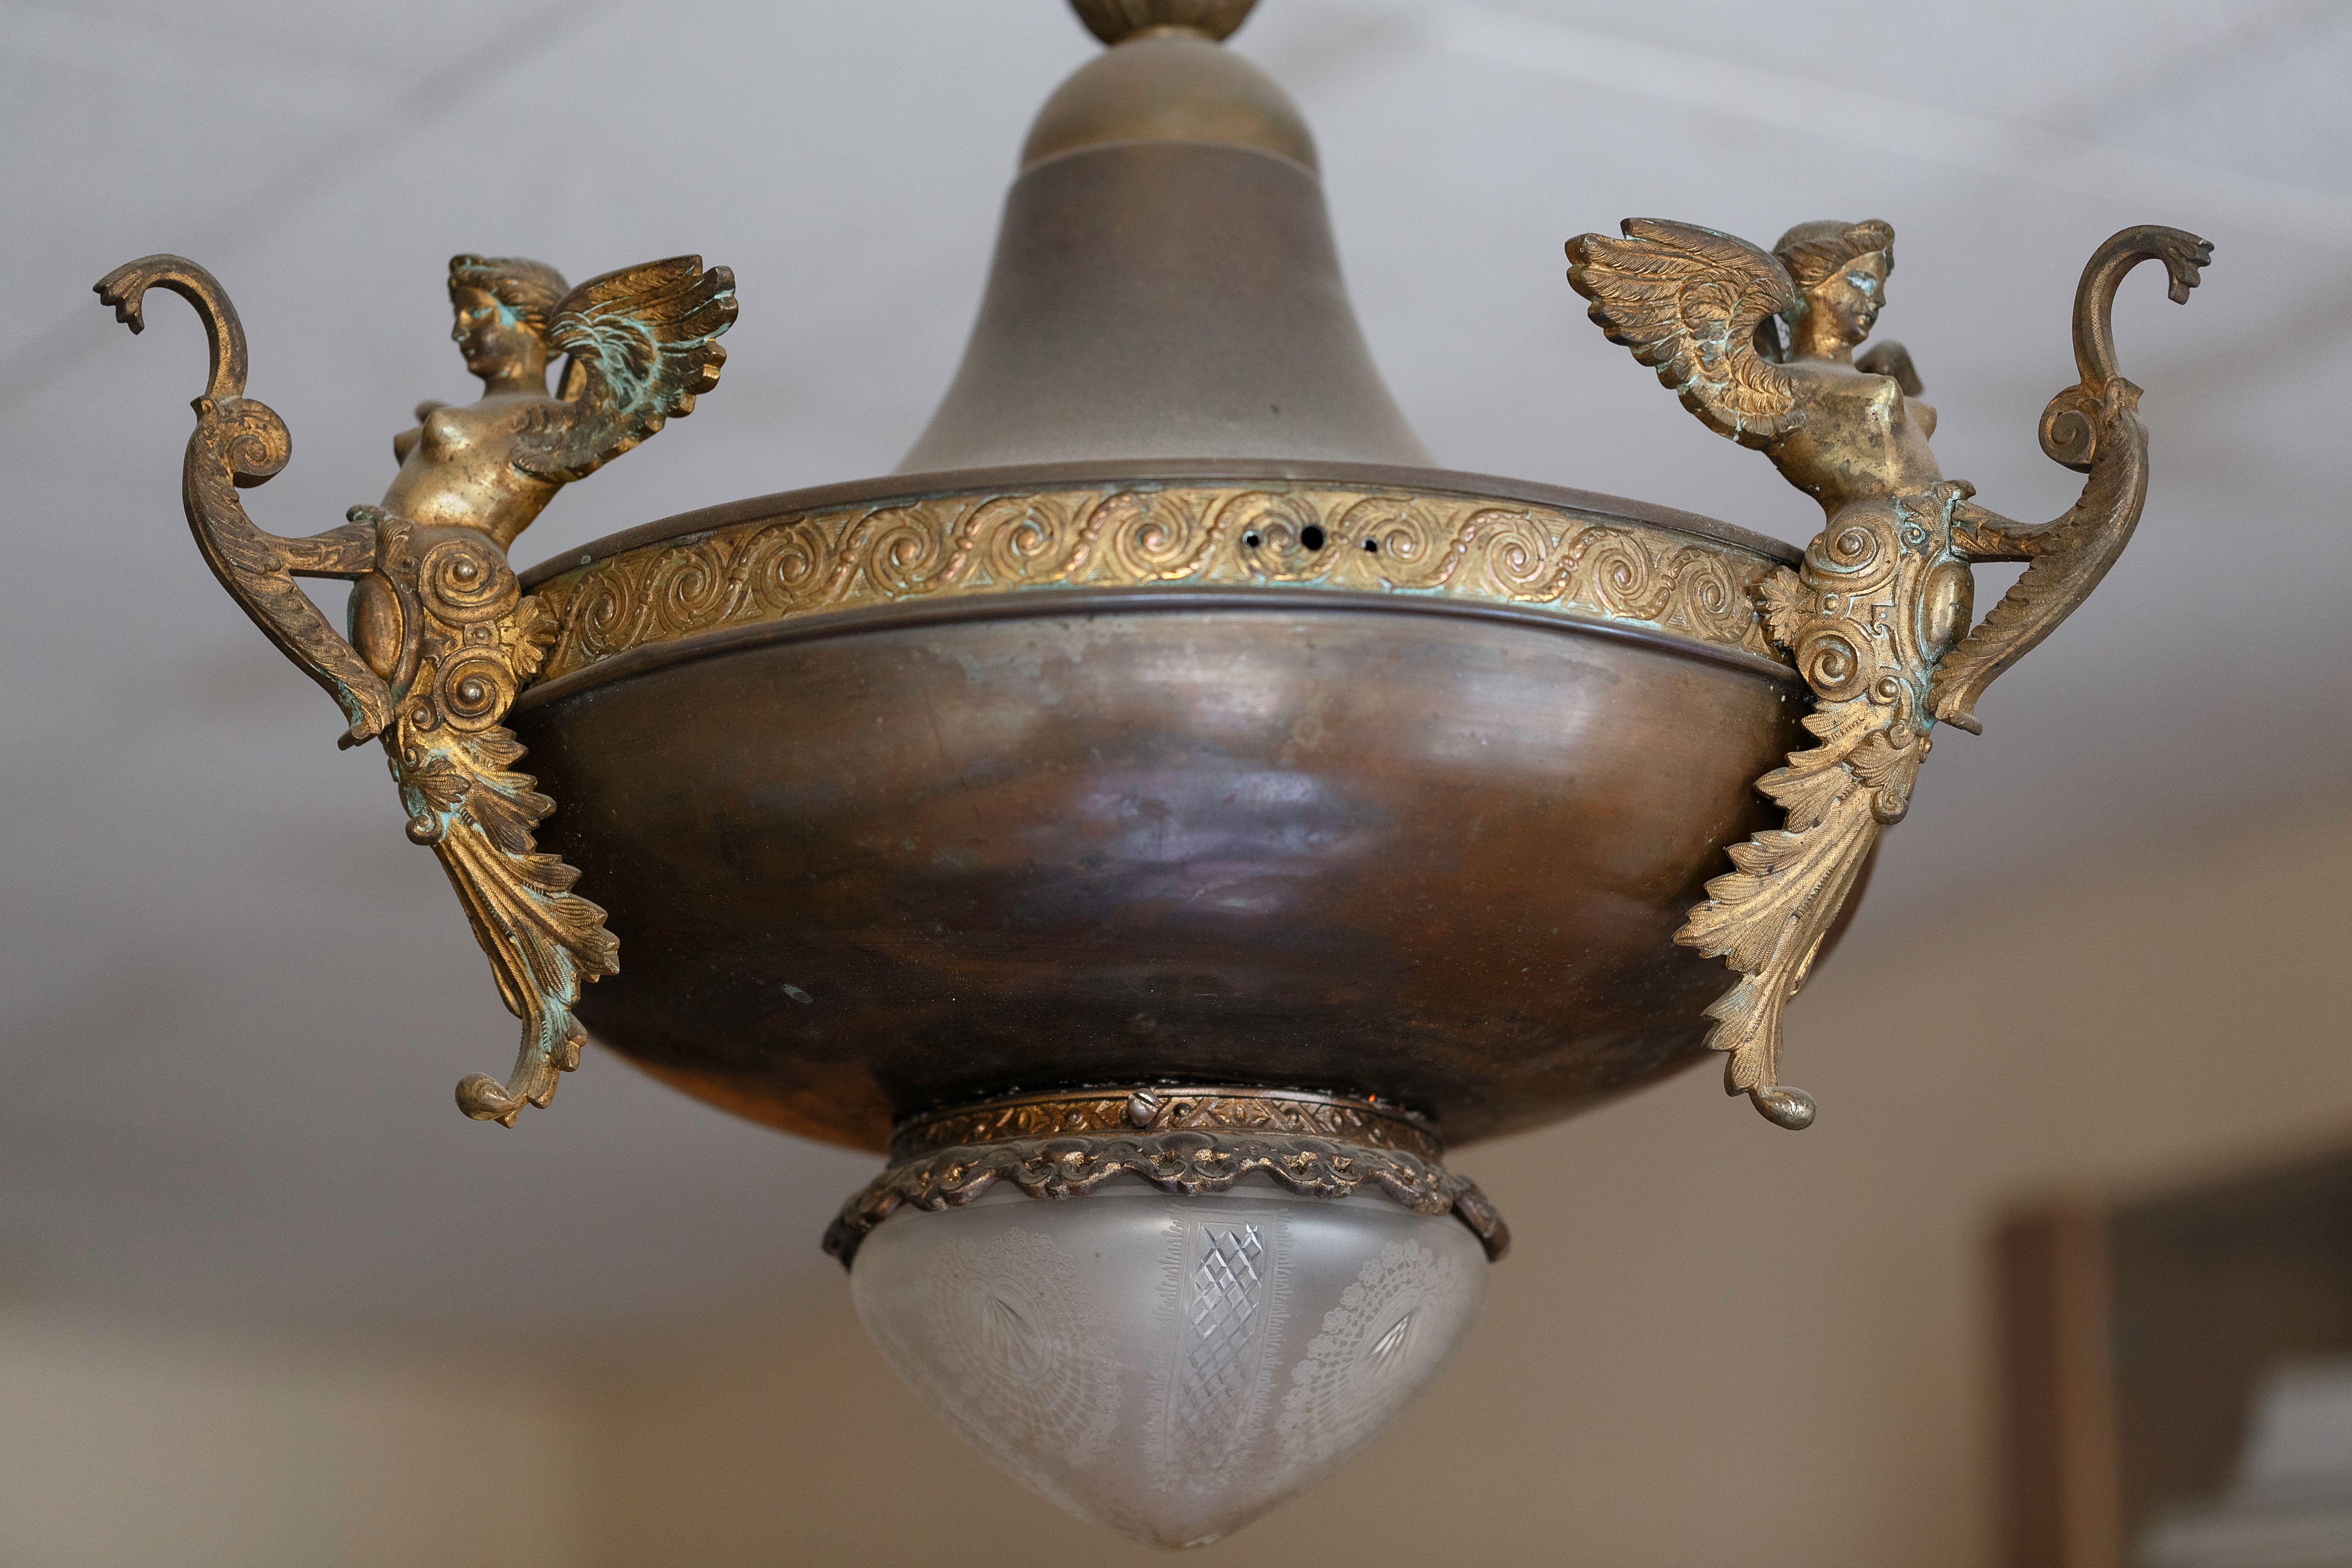 A fragment of the chandelier, the 1900s–1920s, the National M. K. Čiurlionis Museum of Art, Tt-11968. Photo by Povilas Jarmala, 2019